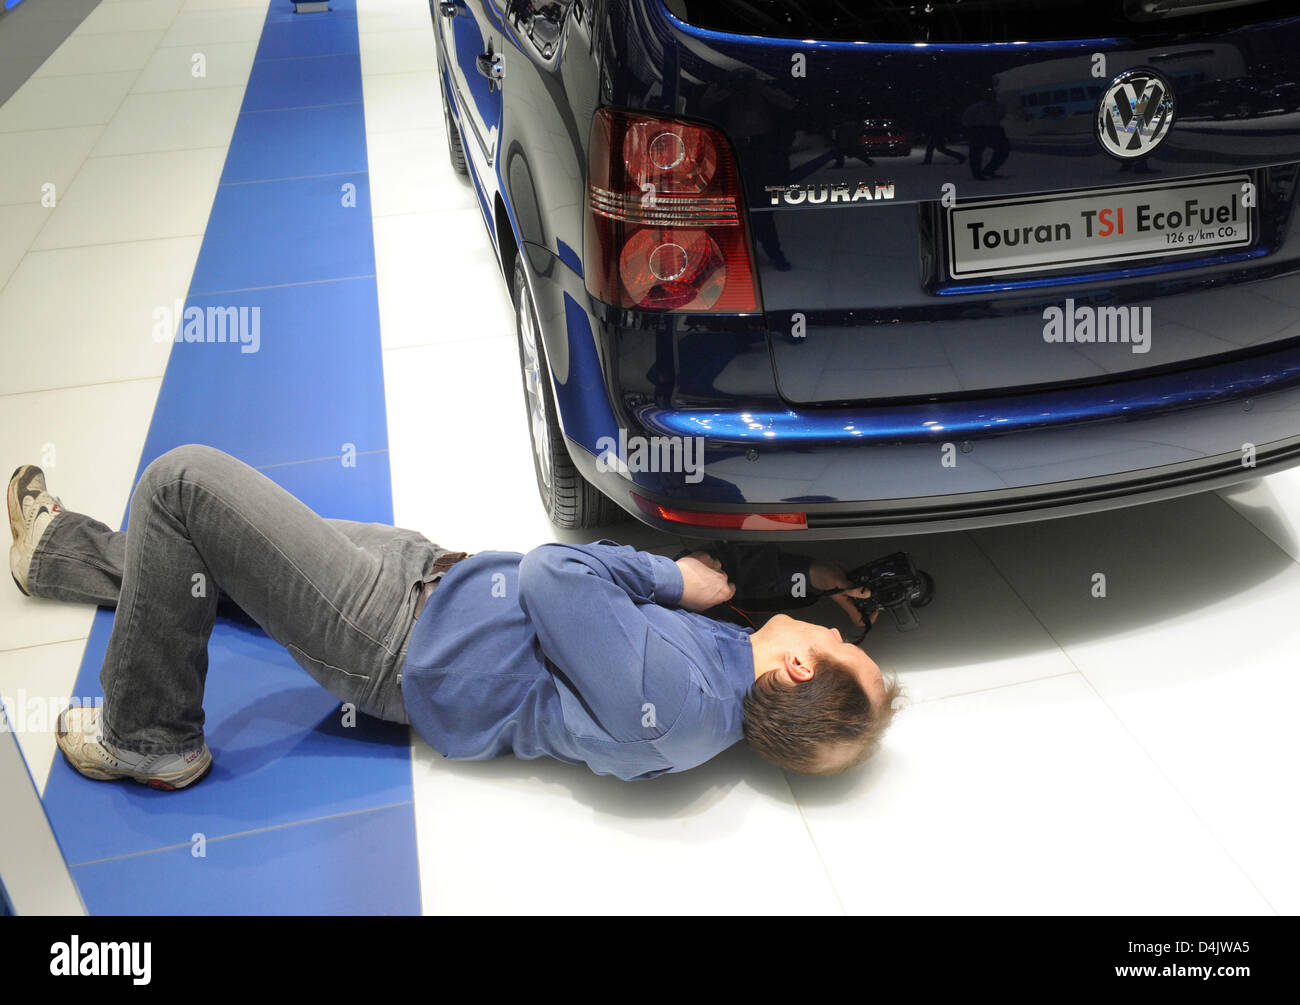 A man takes pictures of a VW Touran TSI EcoFuel on the second press day of  the 79th International Motor Show and Accessories on the Palexpo premises  in Geneva, Switzerland, 04 March